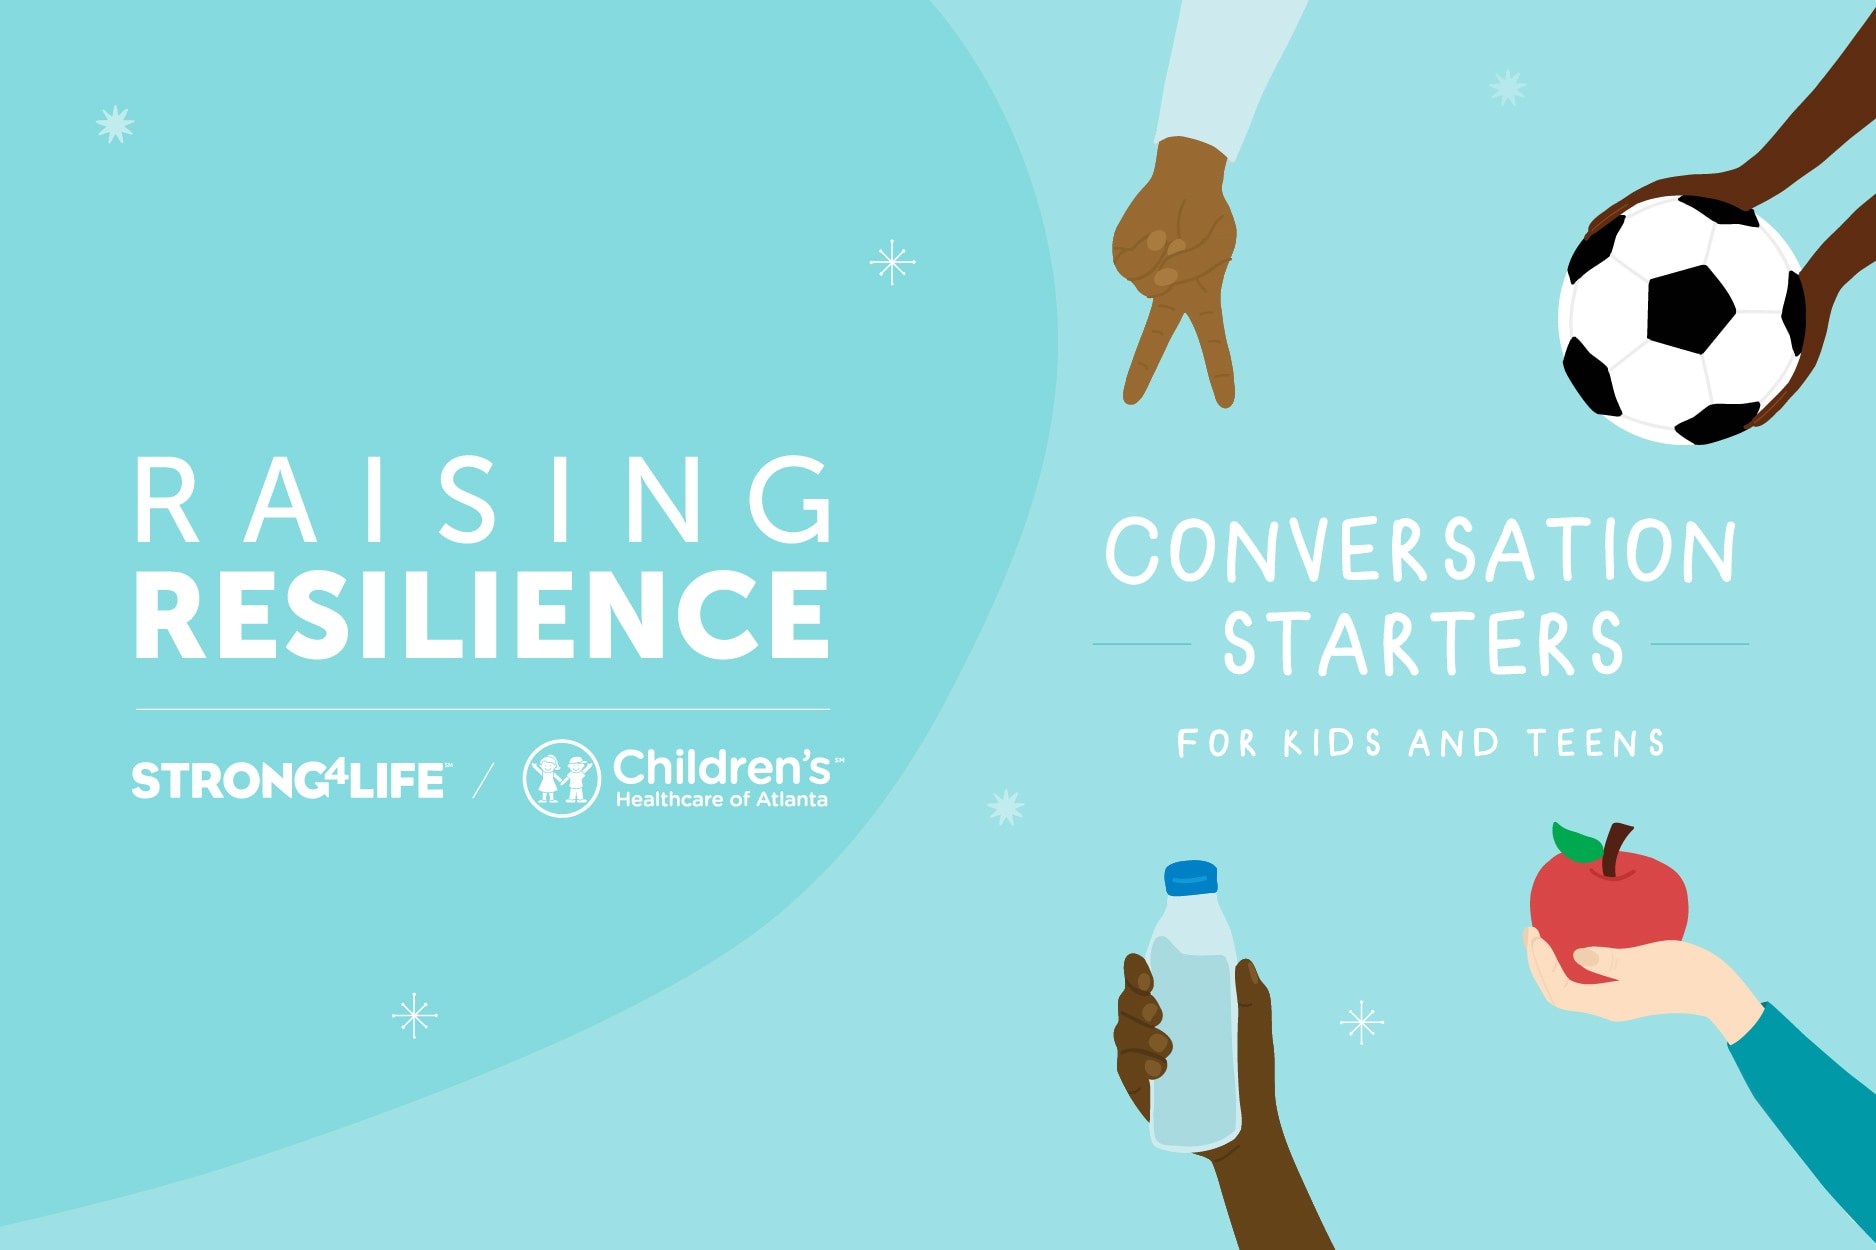 Conversation starts for kids and teens